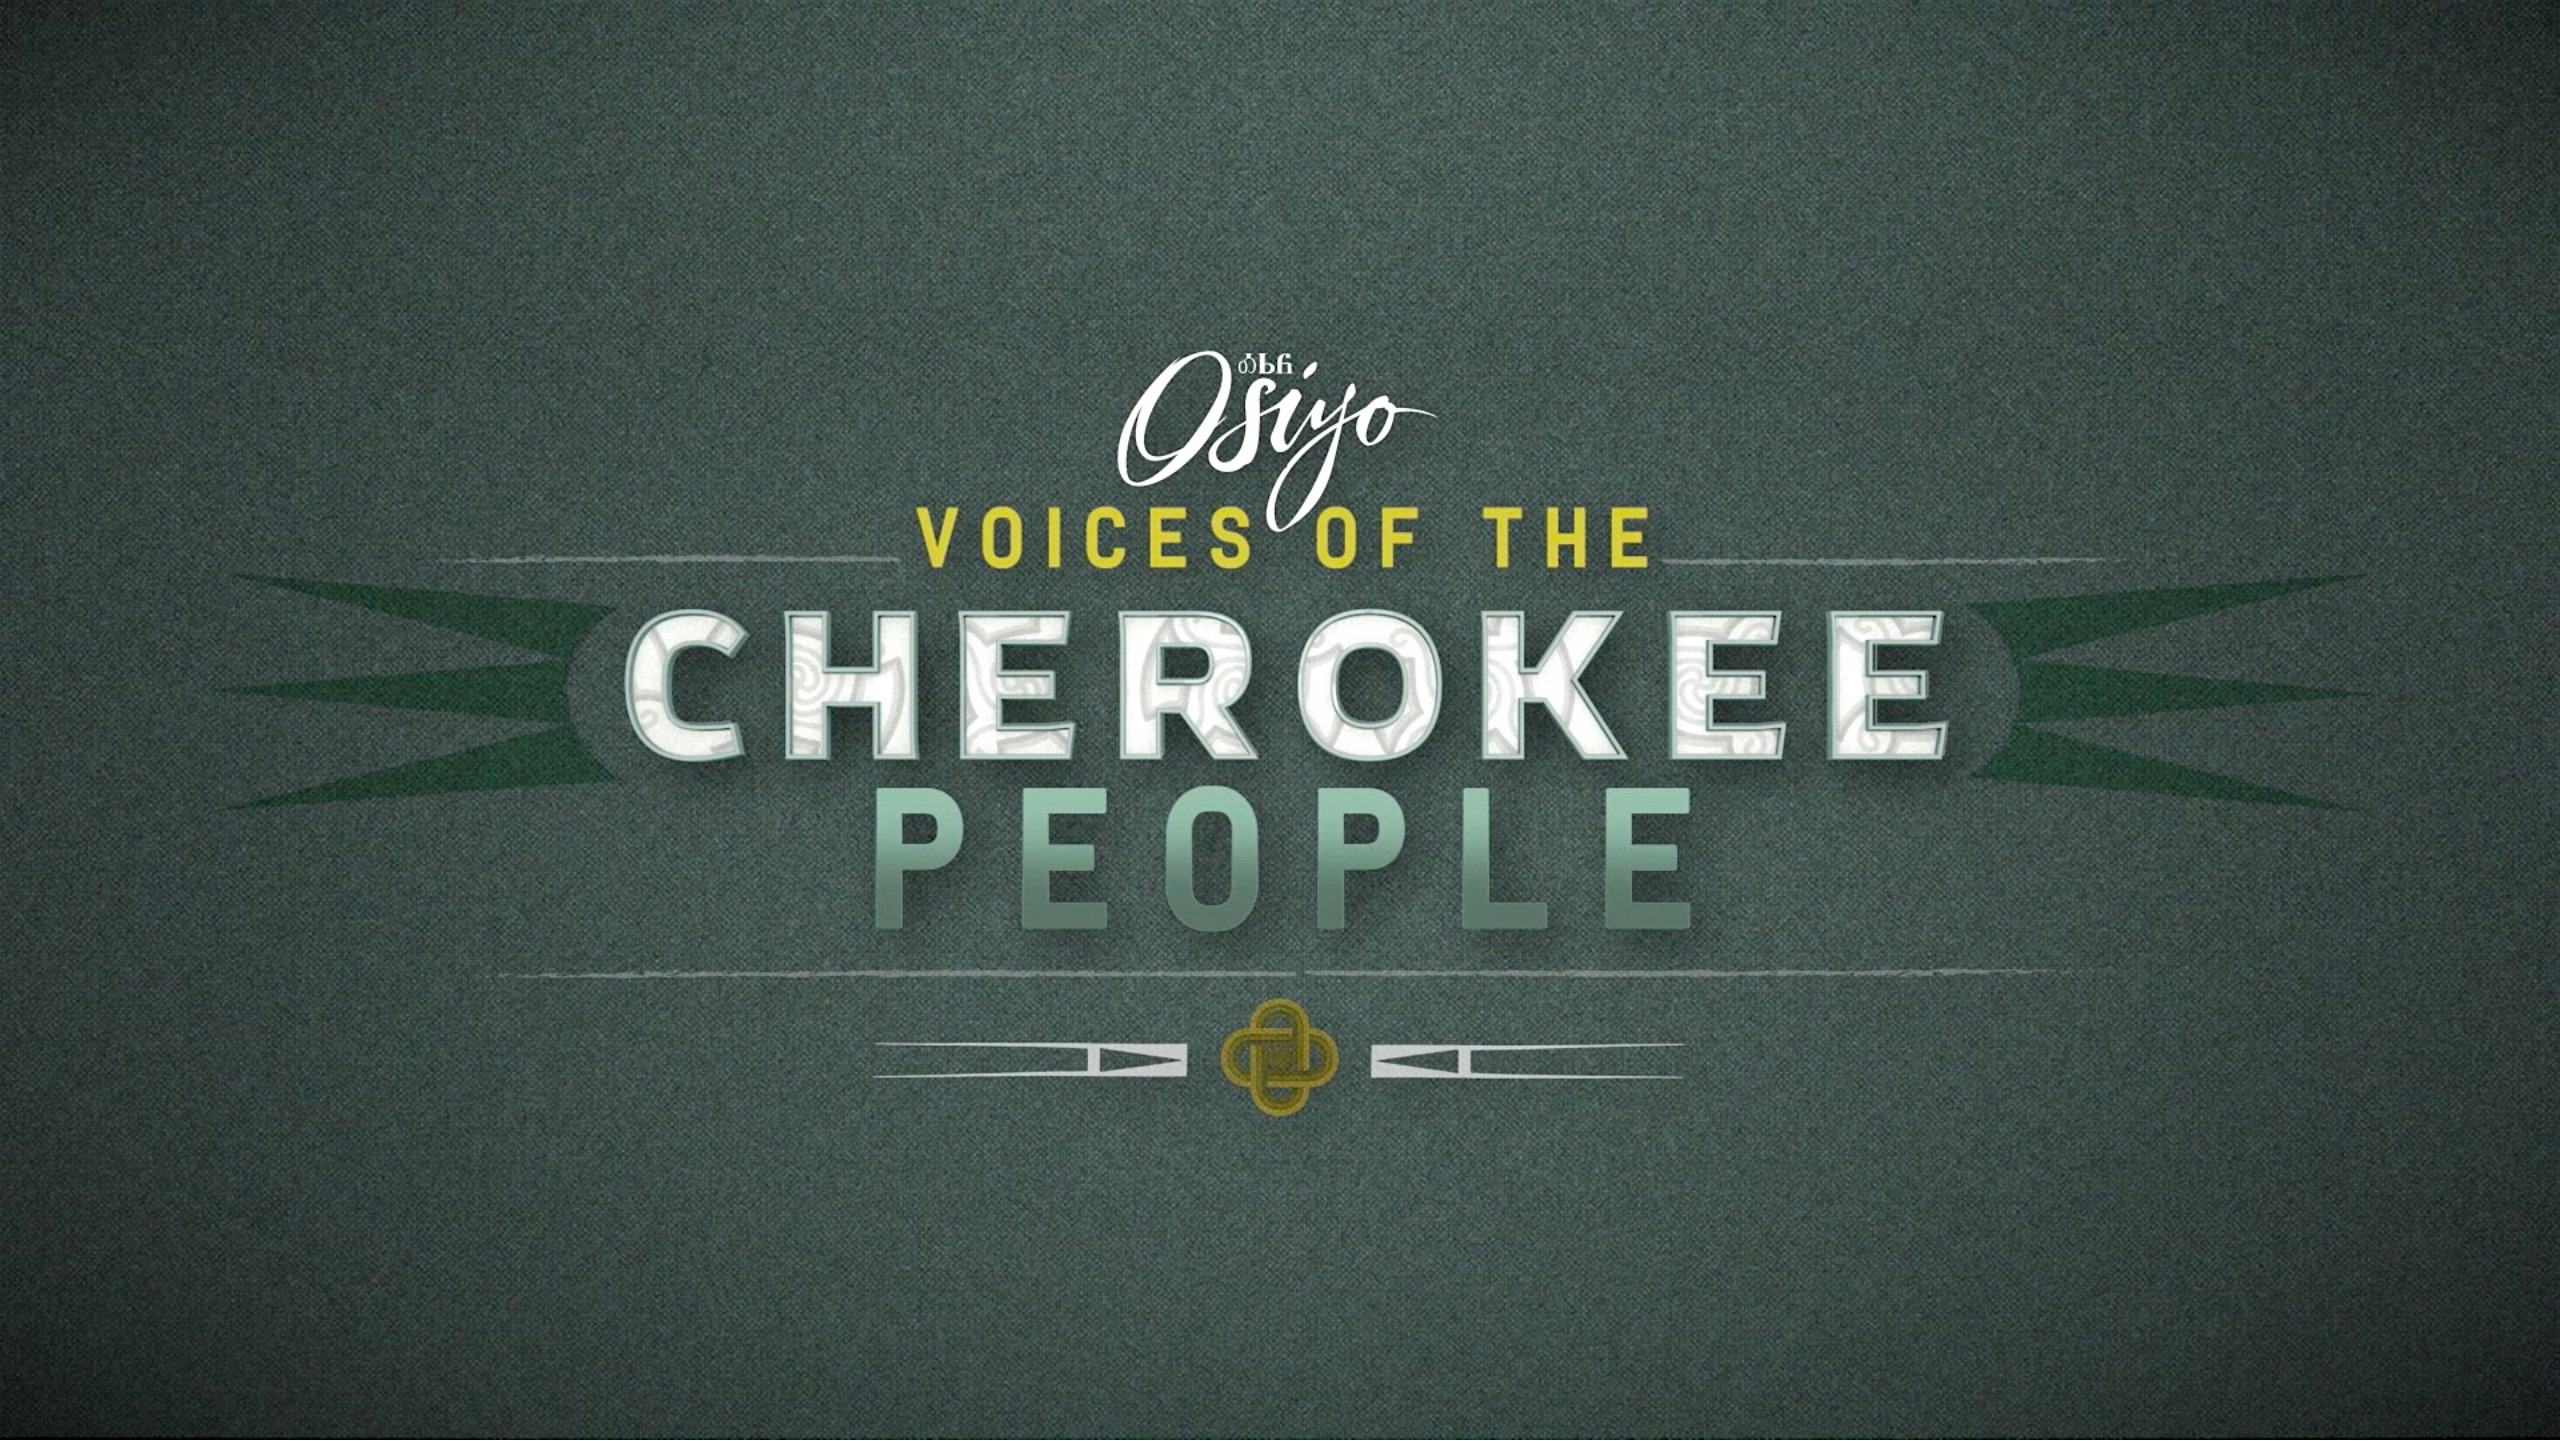 Osiyo, Voices of the Cherokee People  - Logo - https://s41078.pcdn.co/wp-content/uploads/2019/04/OsiyoTV_main_logo_hi-res.large_.jpg